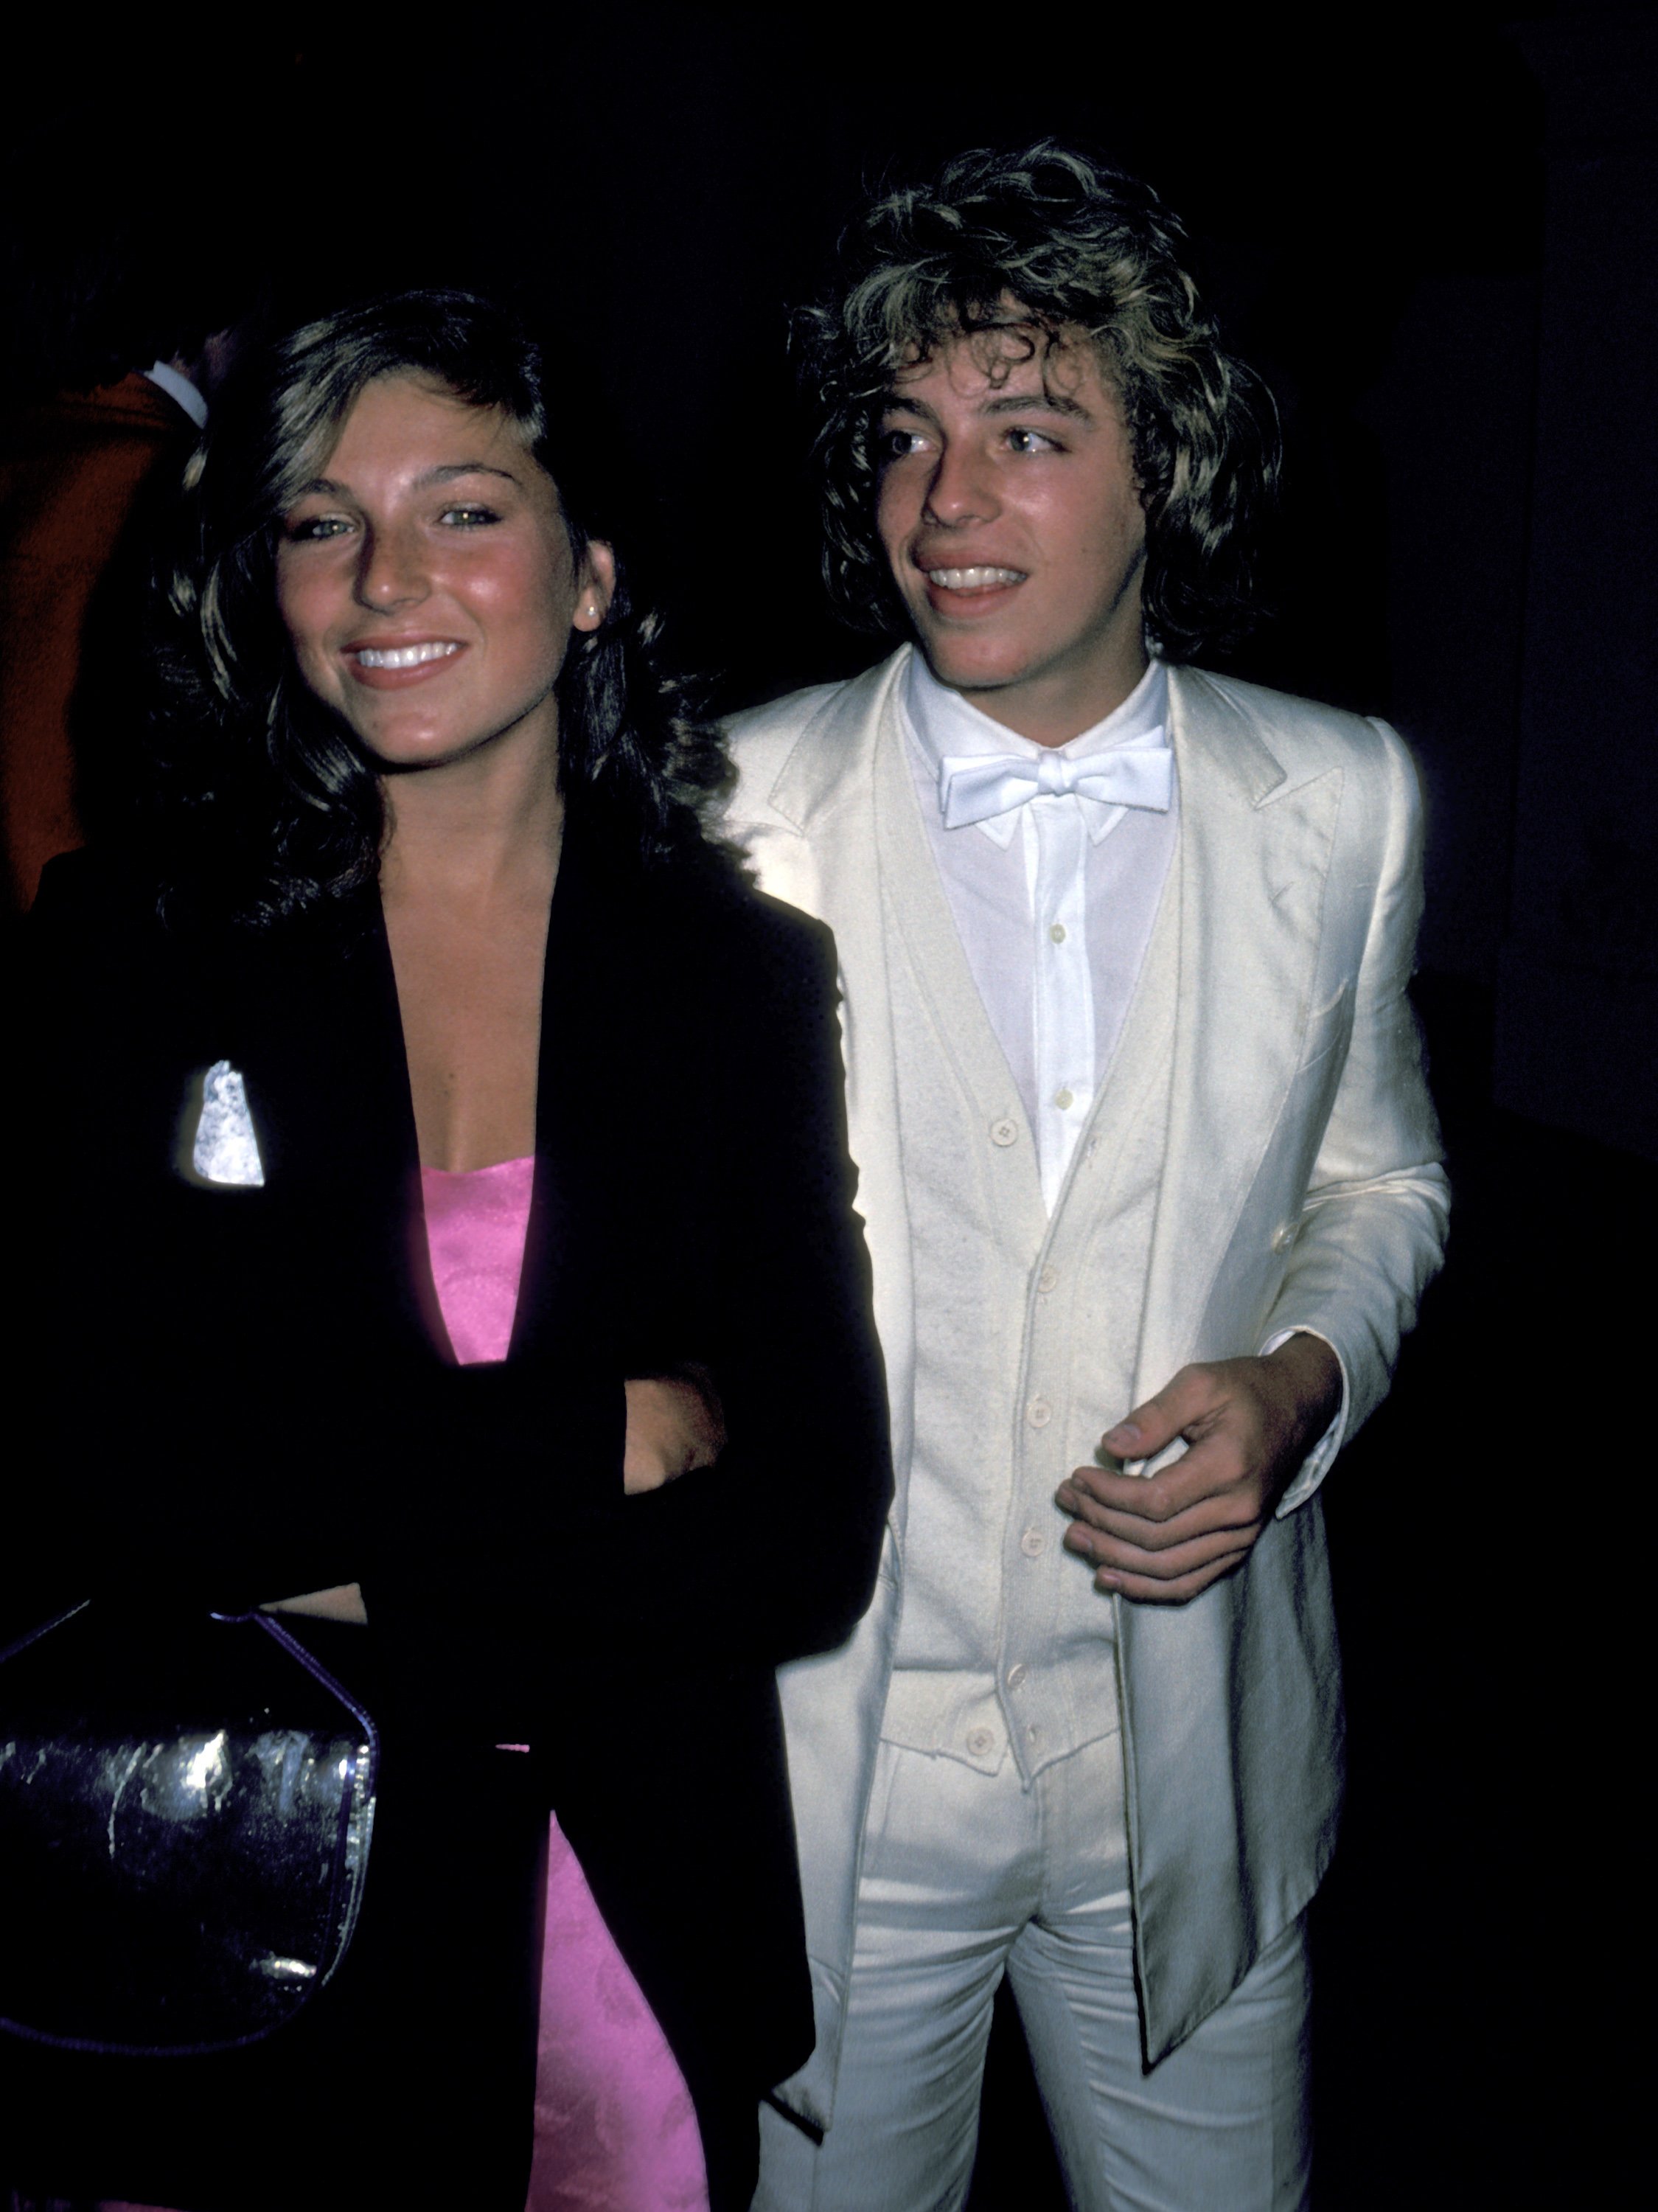 Tatum O'Neal and Leif Garrett at La Cage Aux Folles Private Party at La Cage Aux Folles in West Hollywood, California, on April 15, 1981. | Source: Getty Images